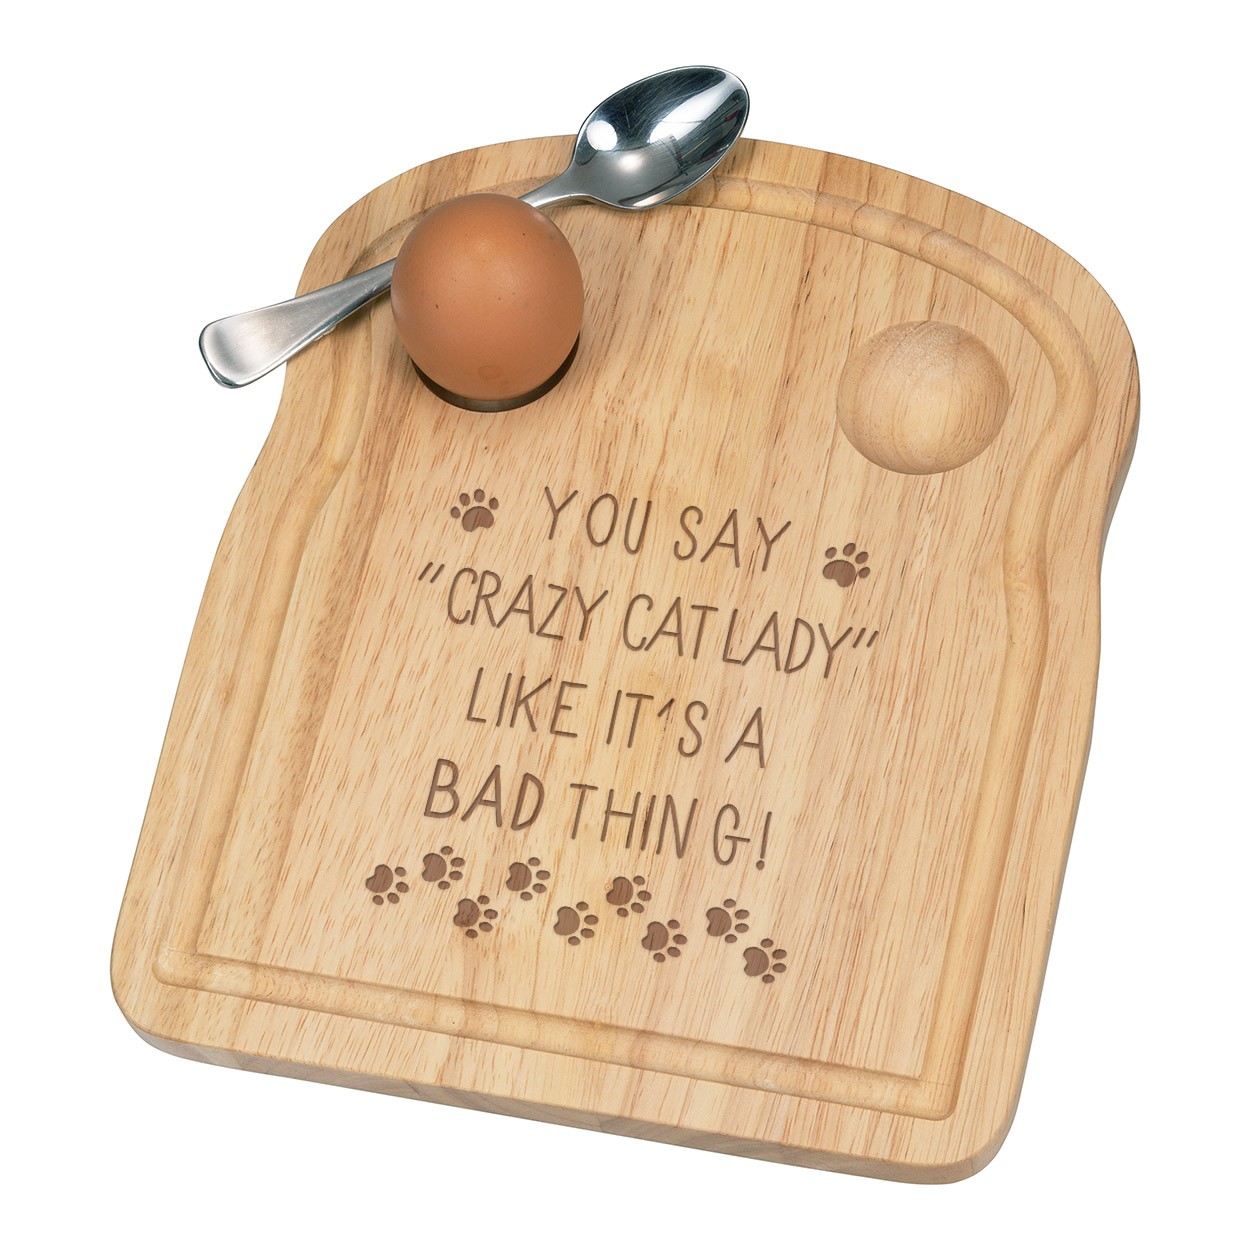 You Say Crazy Cat Lady Like It's A Bad Thing Breakfast Dippy Egg Cup Board Wooden